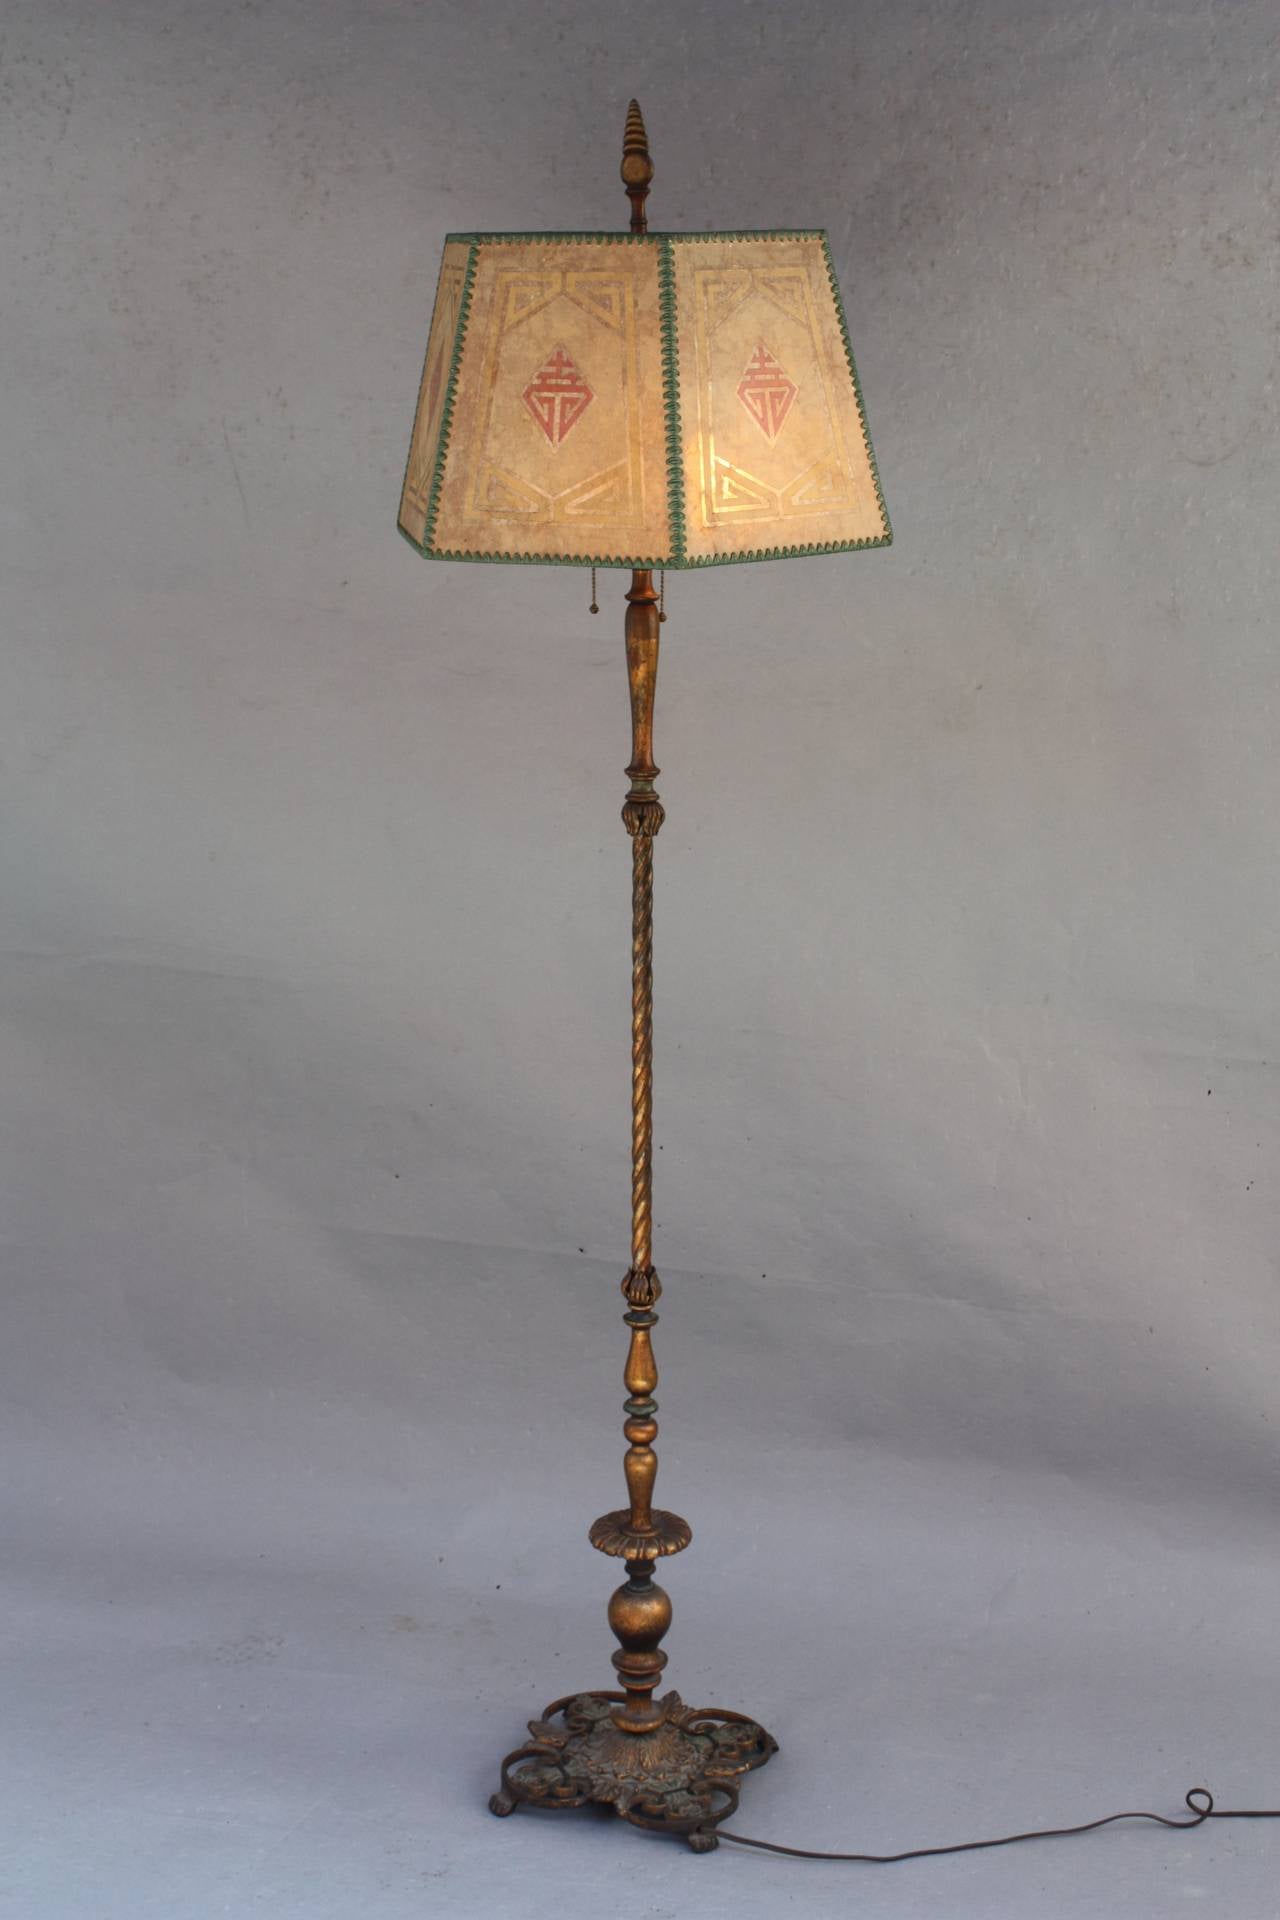 Circa 1920's lamp with original shade and base. Polychrome finish on base 12